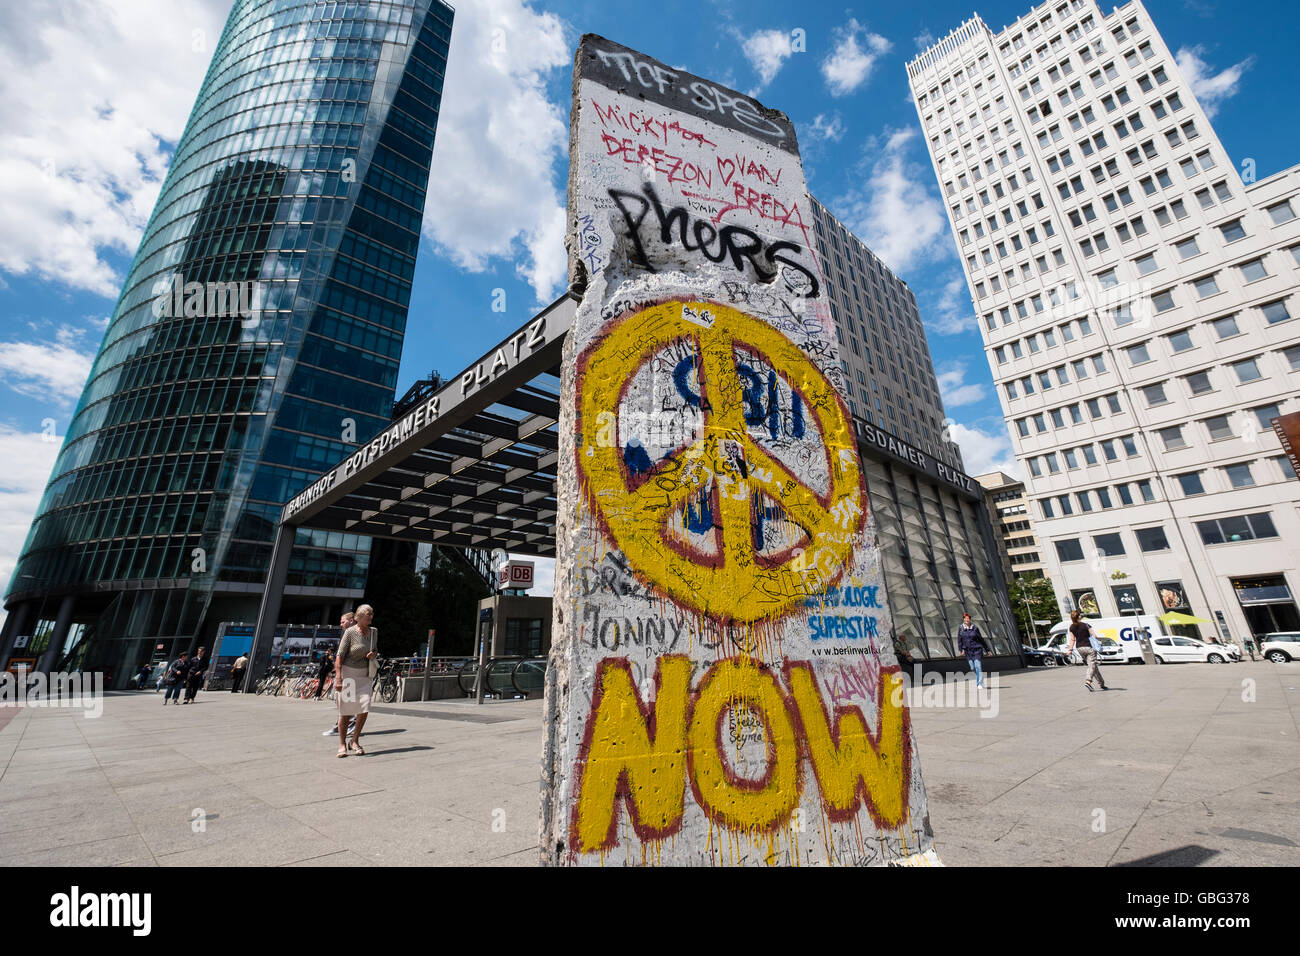 Section of former Berlin wall with graffiti at Potsdamer Platz in Berlin Germany Stock Photo